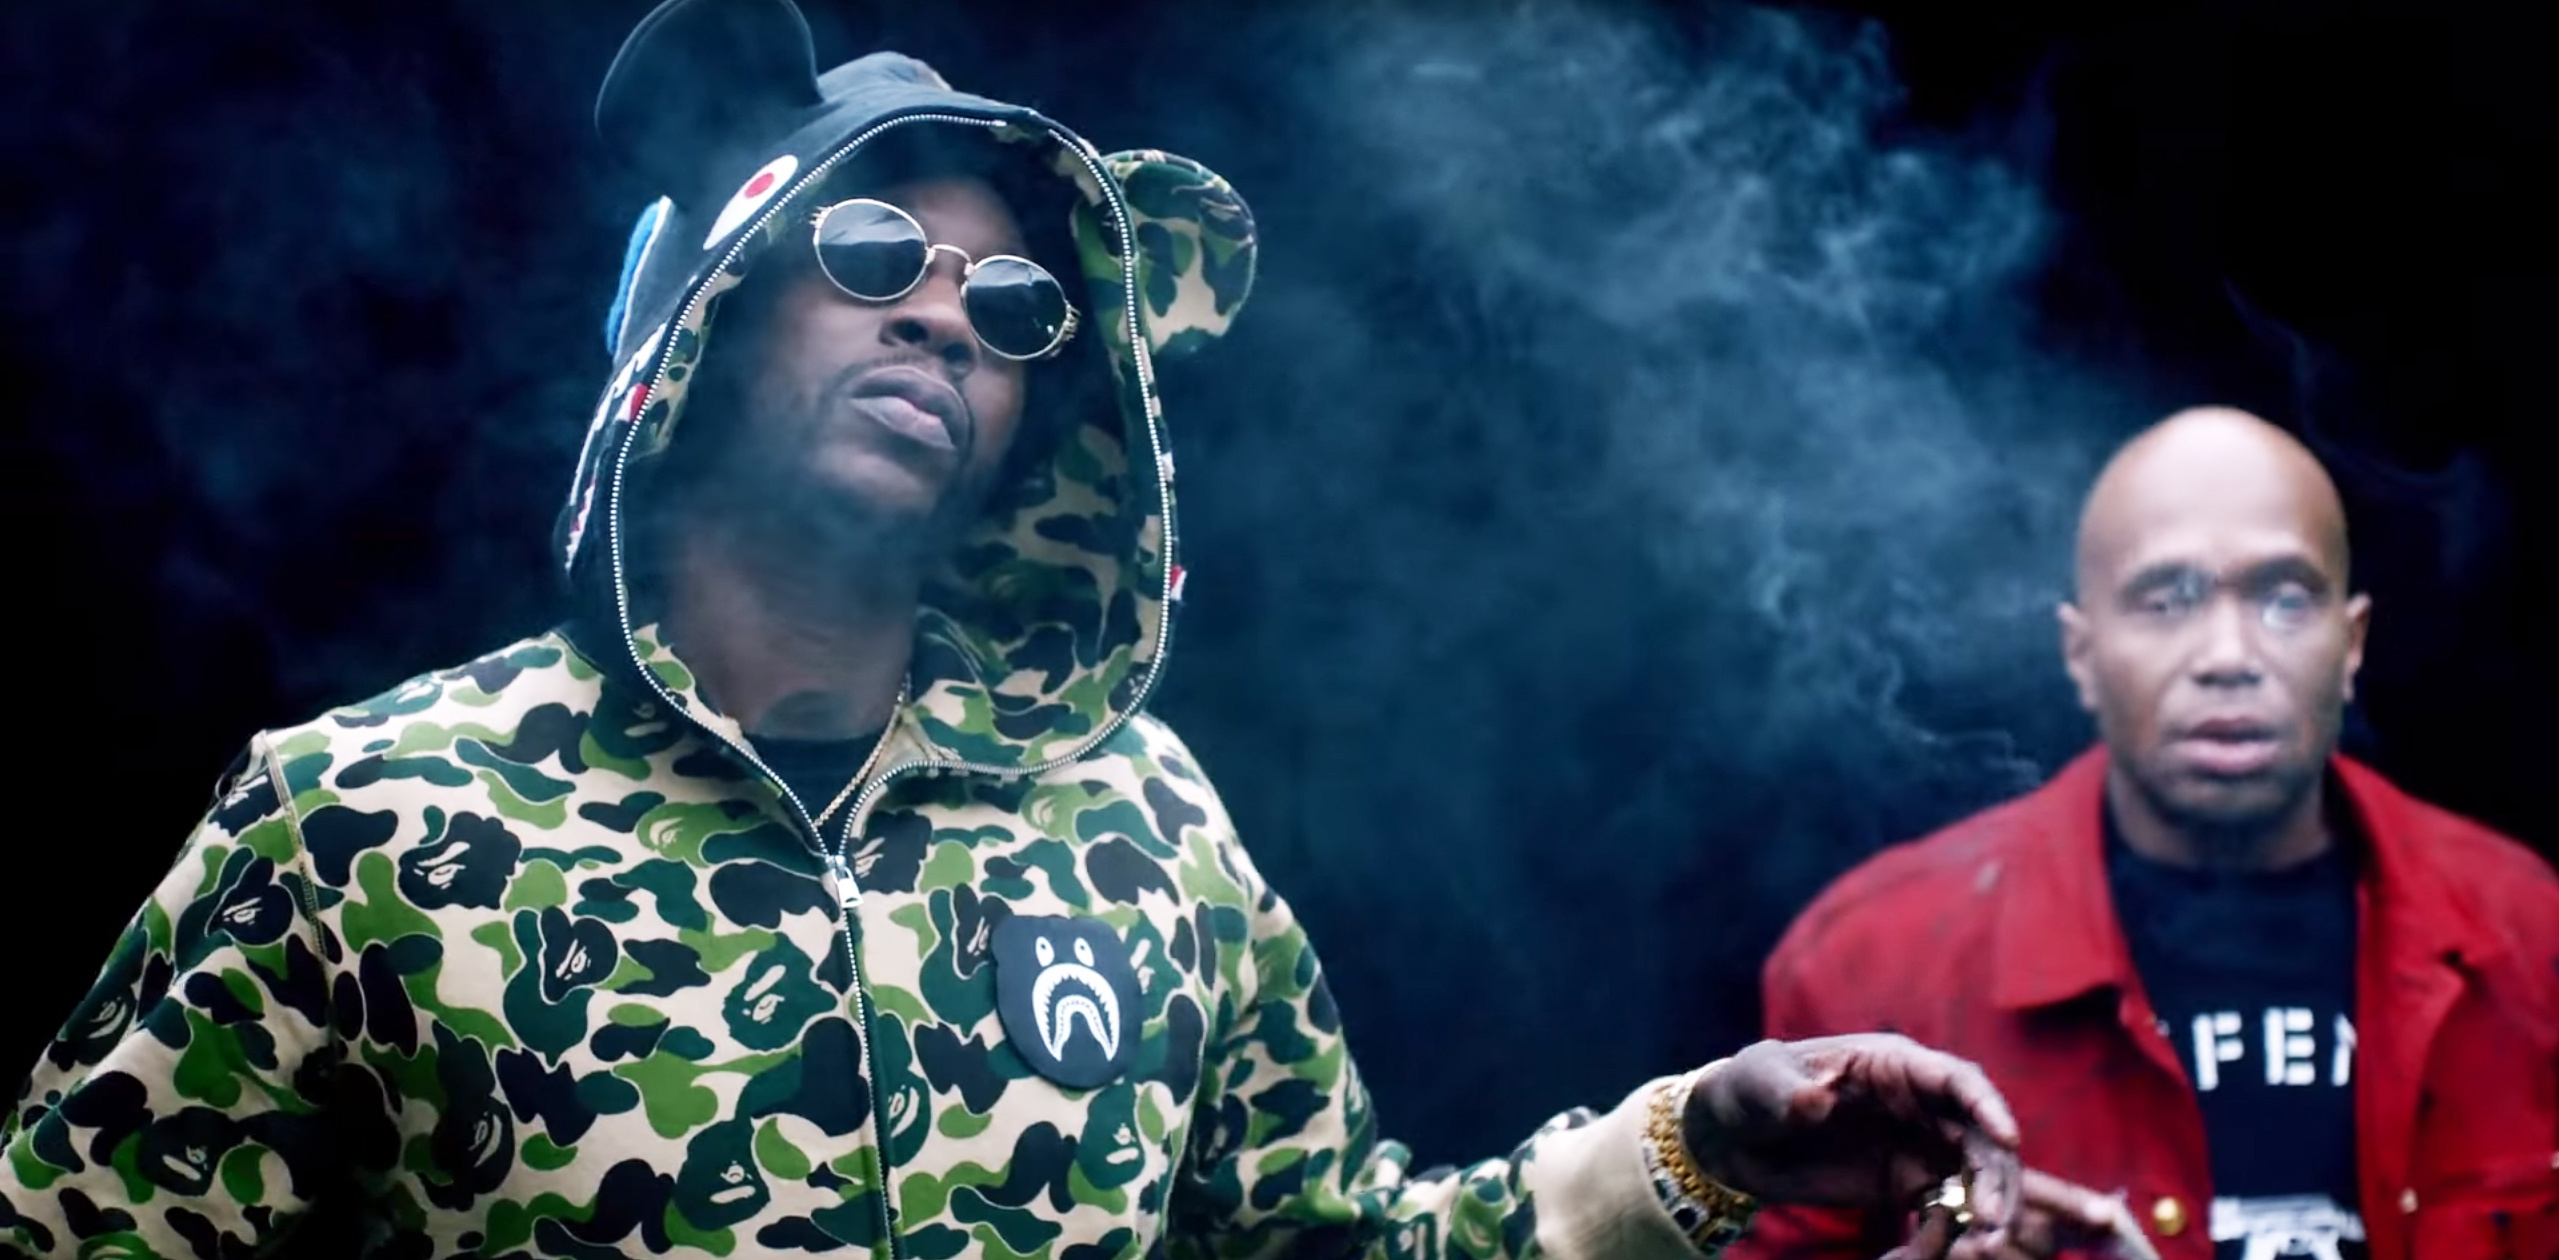 2 Chainz, Goofy watch out video, Rolling Stone, Multiple characters, 2560x1260 Dual Screen Desktop